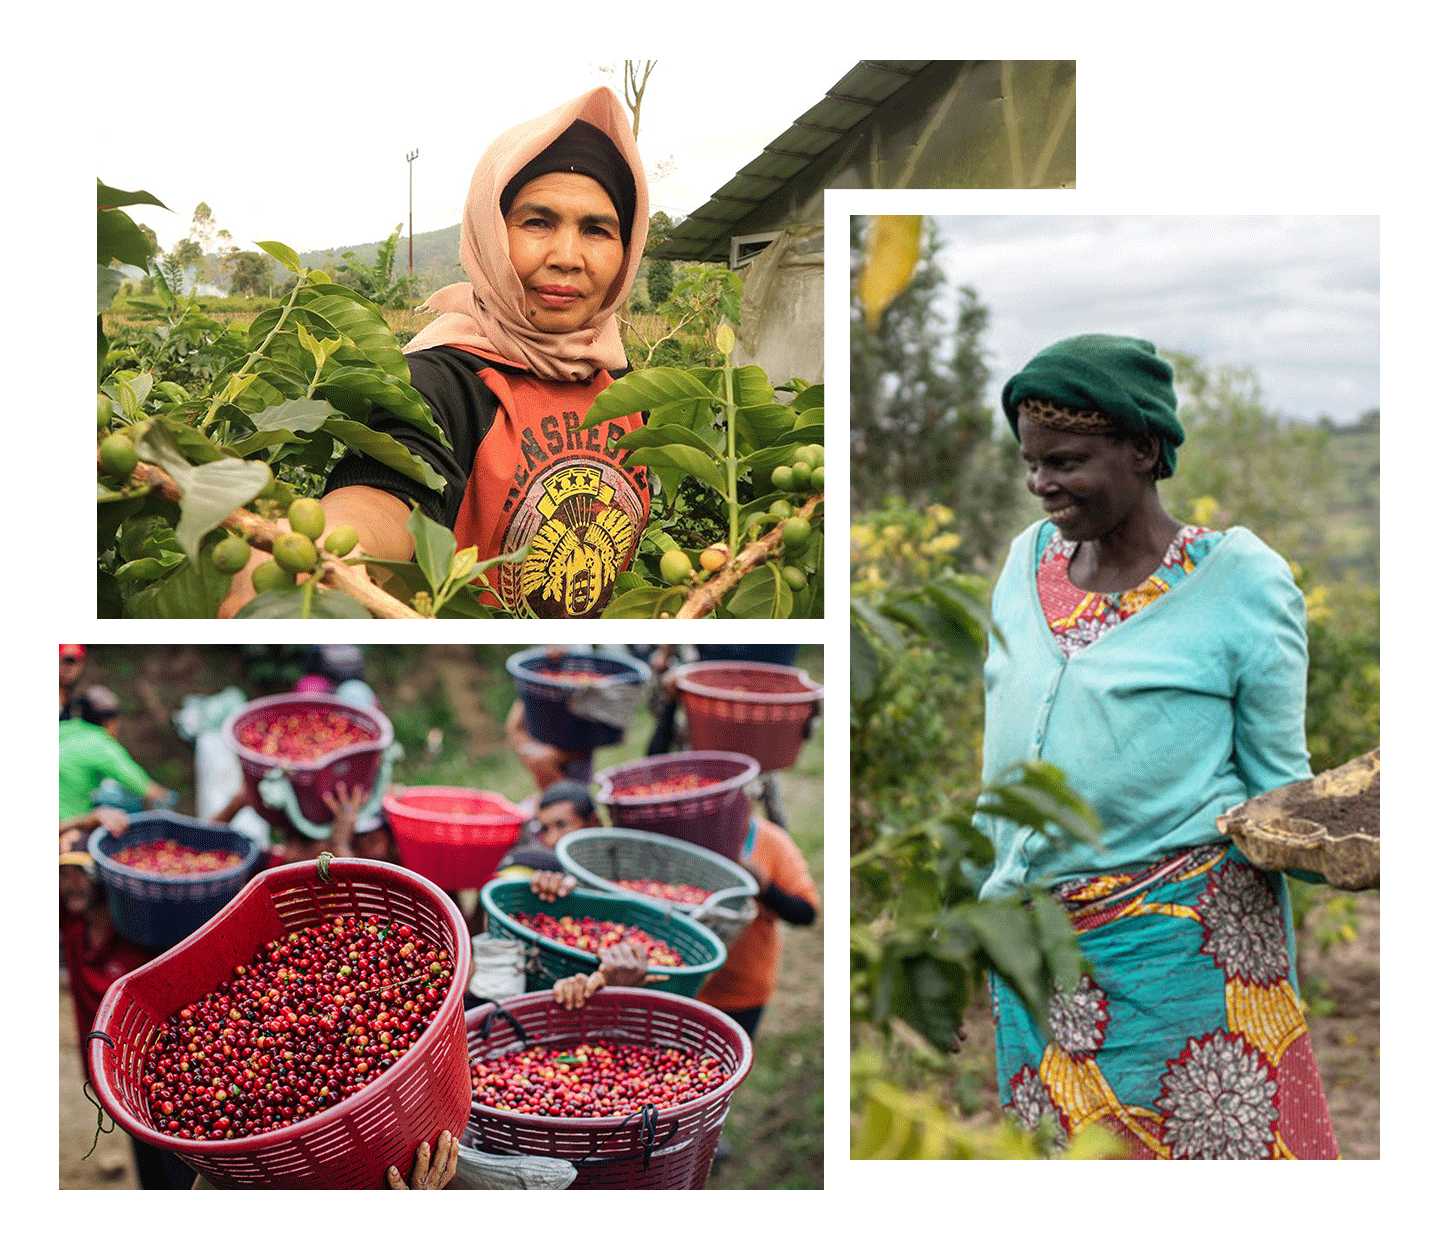 A collage of three images shows two women: one is of a woman holding a basket of green coffee beans  and the other is a woman holding a coffee branch. The third images shows buckets of fresh coffee cherries.